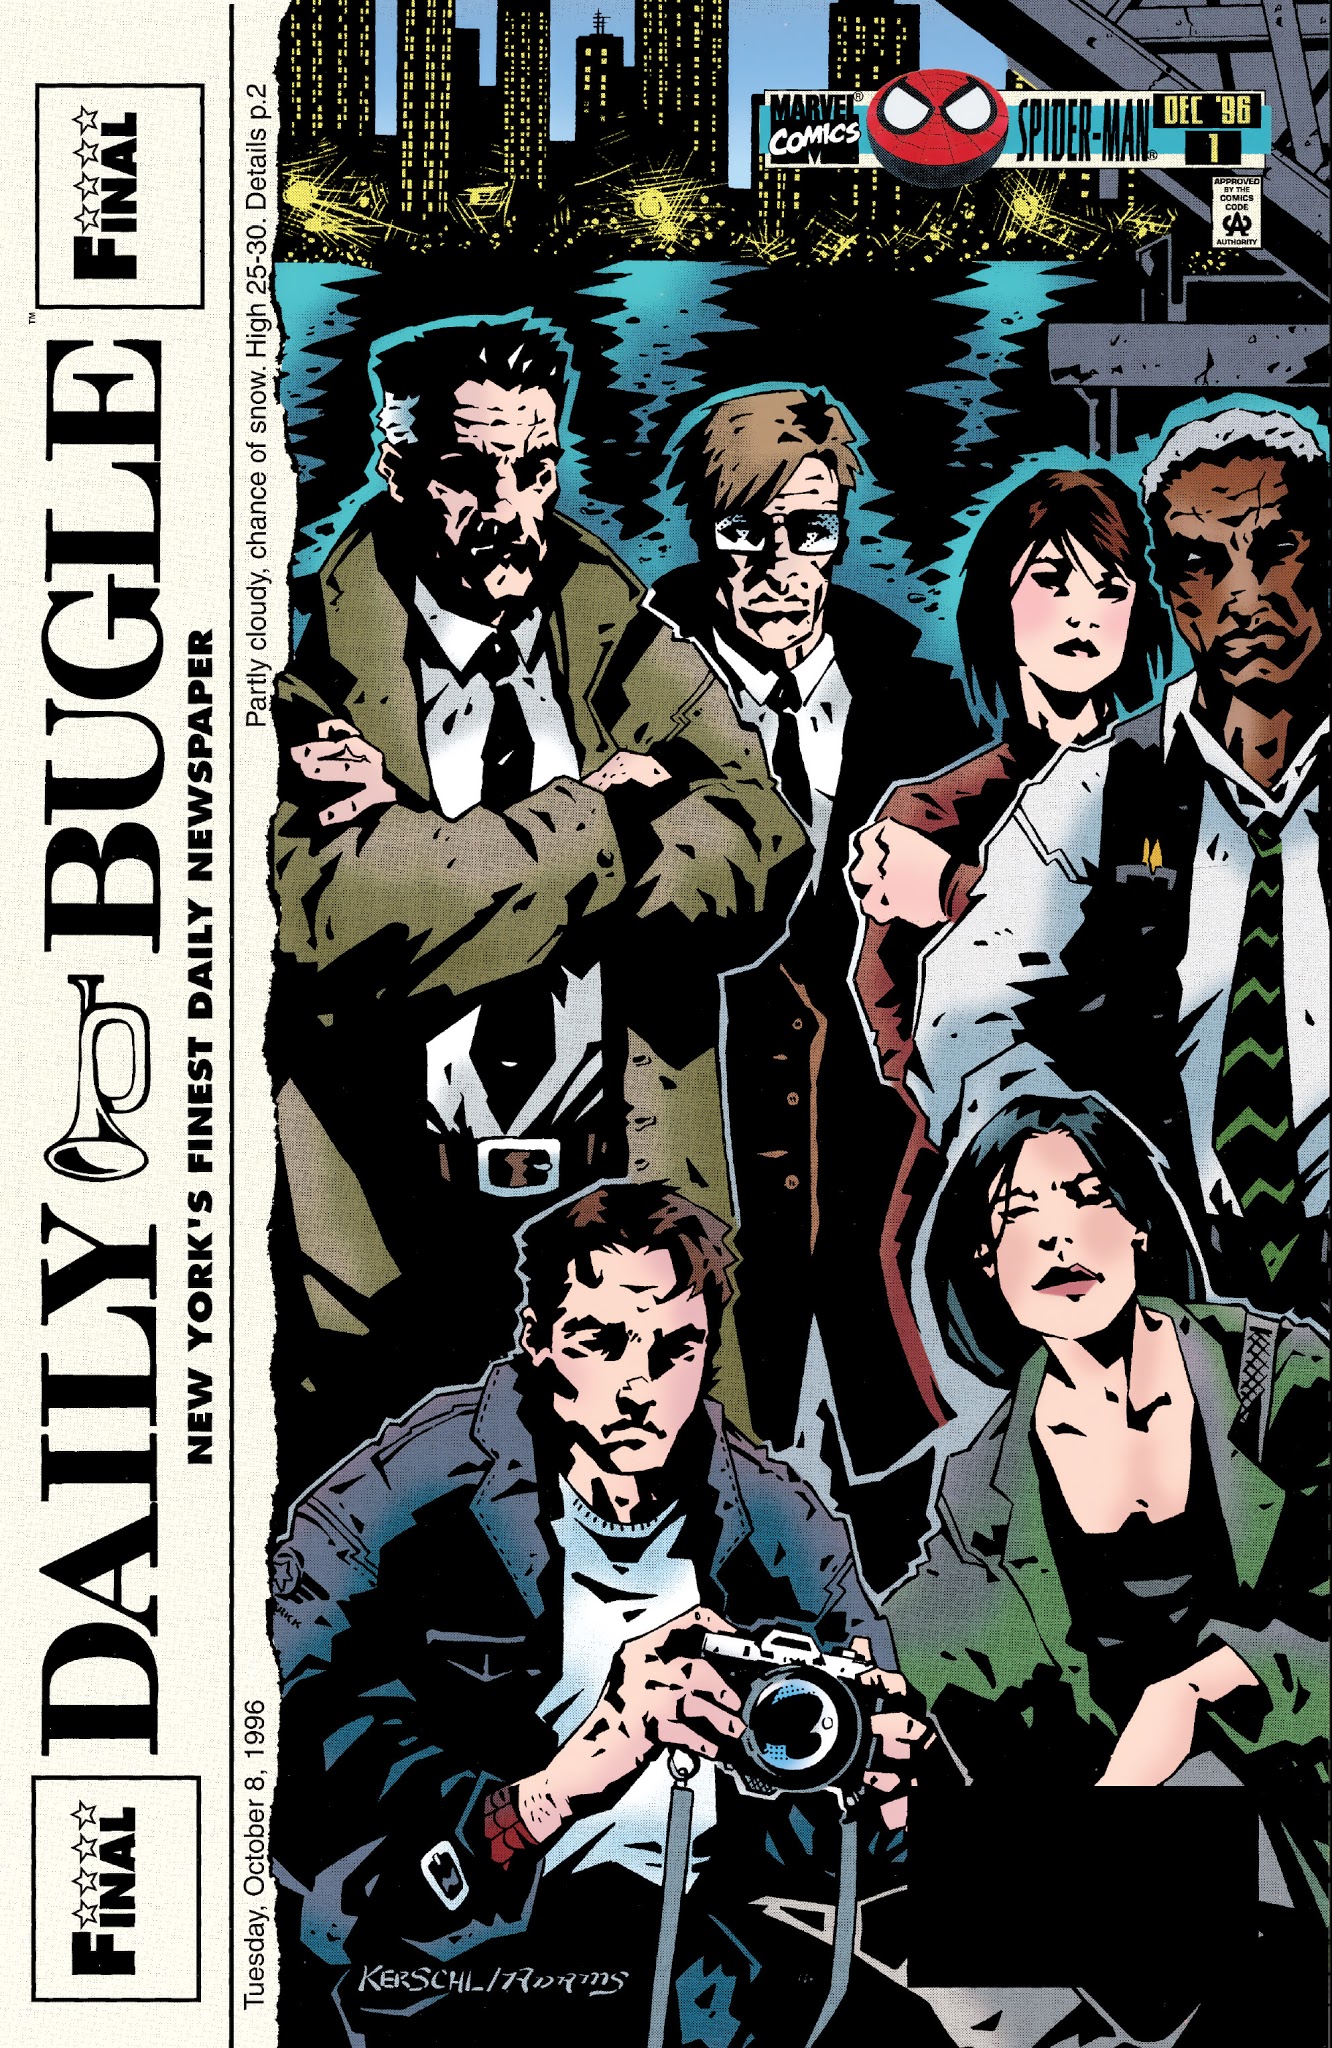 Read online Spider-Man: Daily Bugle comic -  Issue # TPB - 4